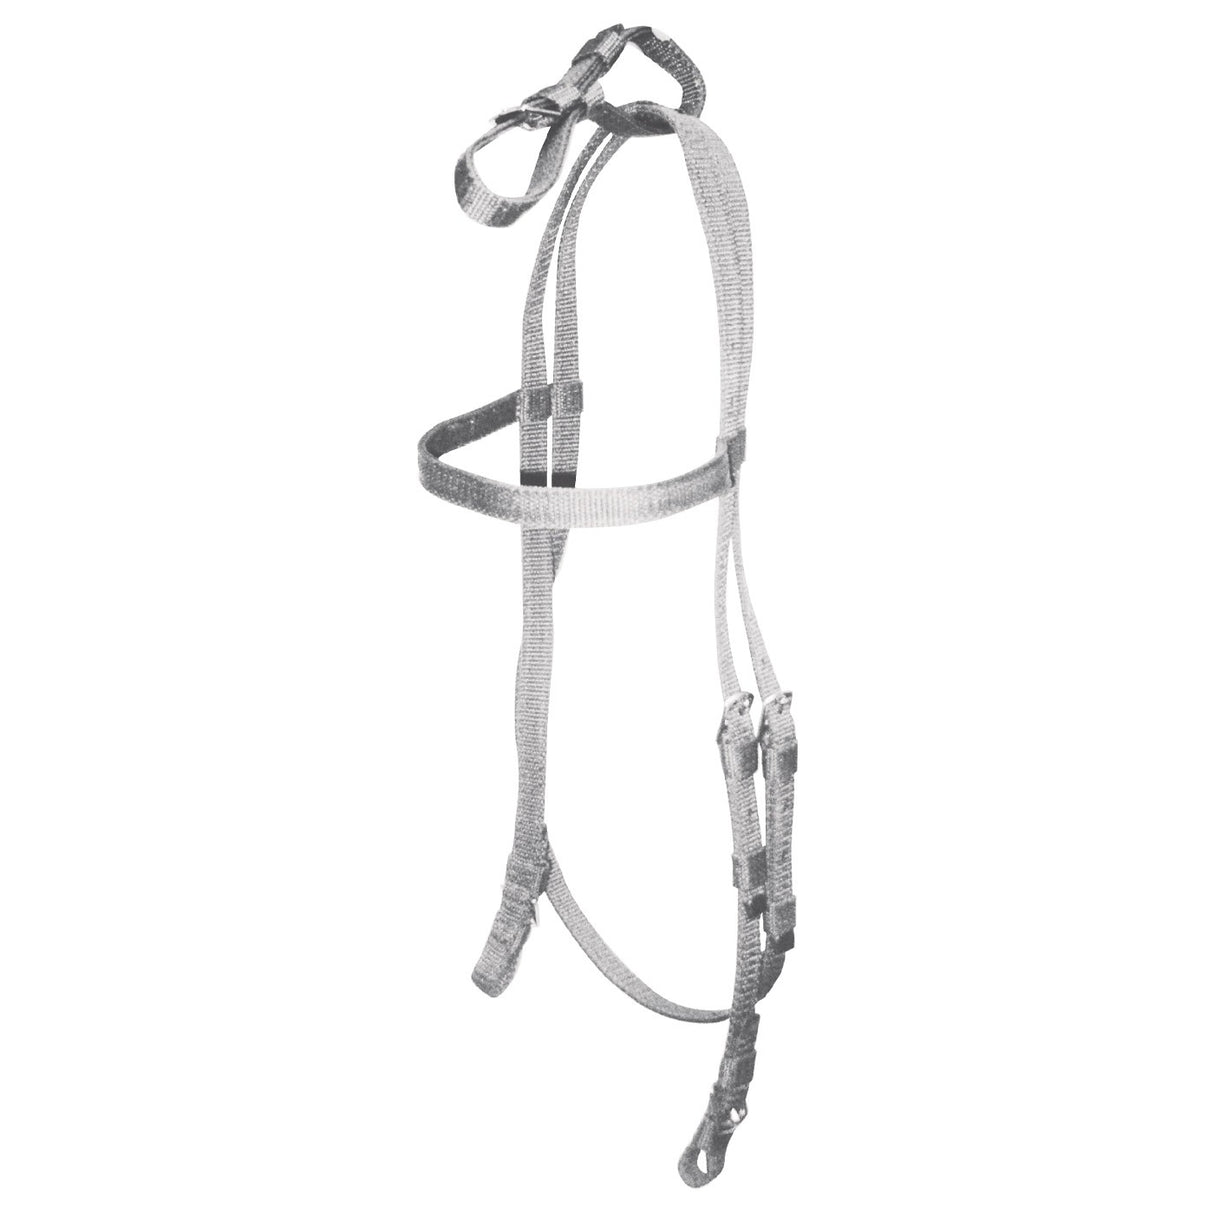 Shedrow Thoroughbred Race Headstall